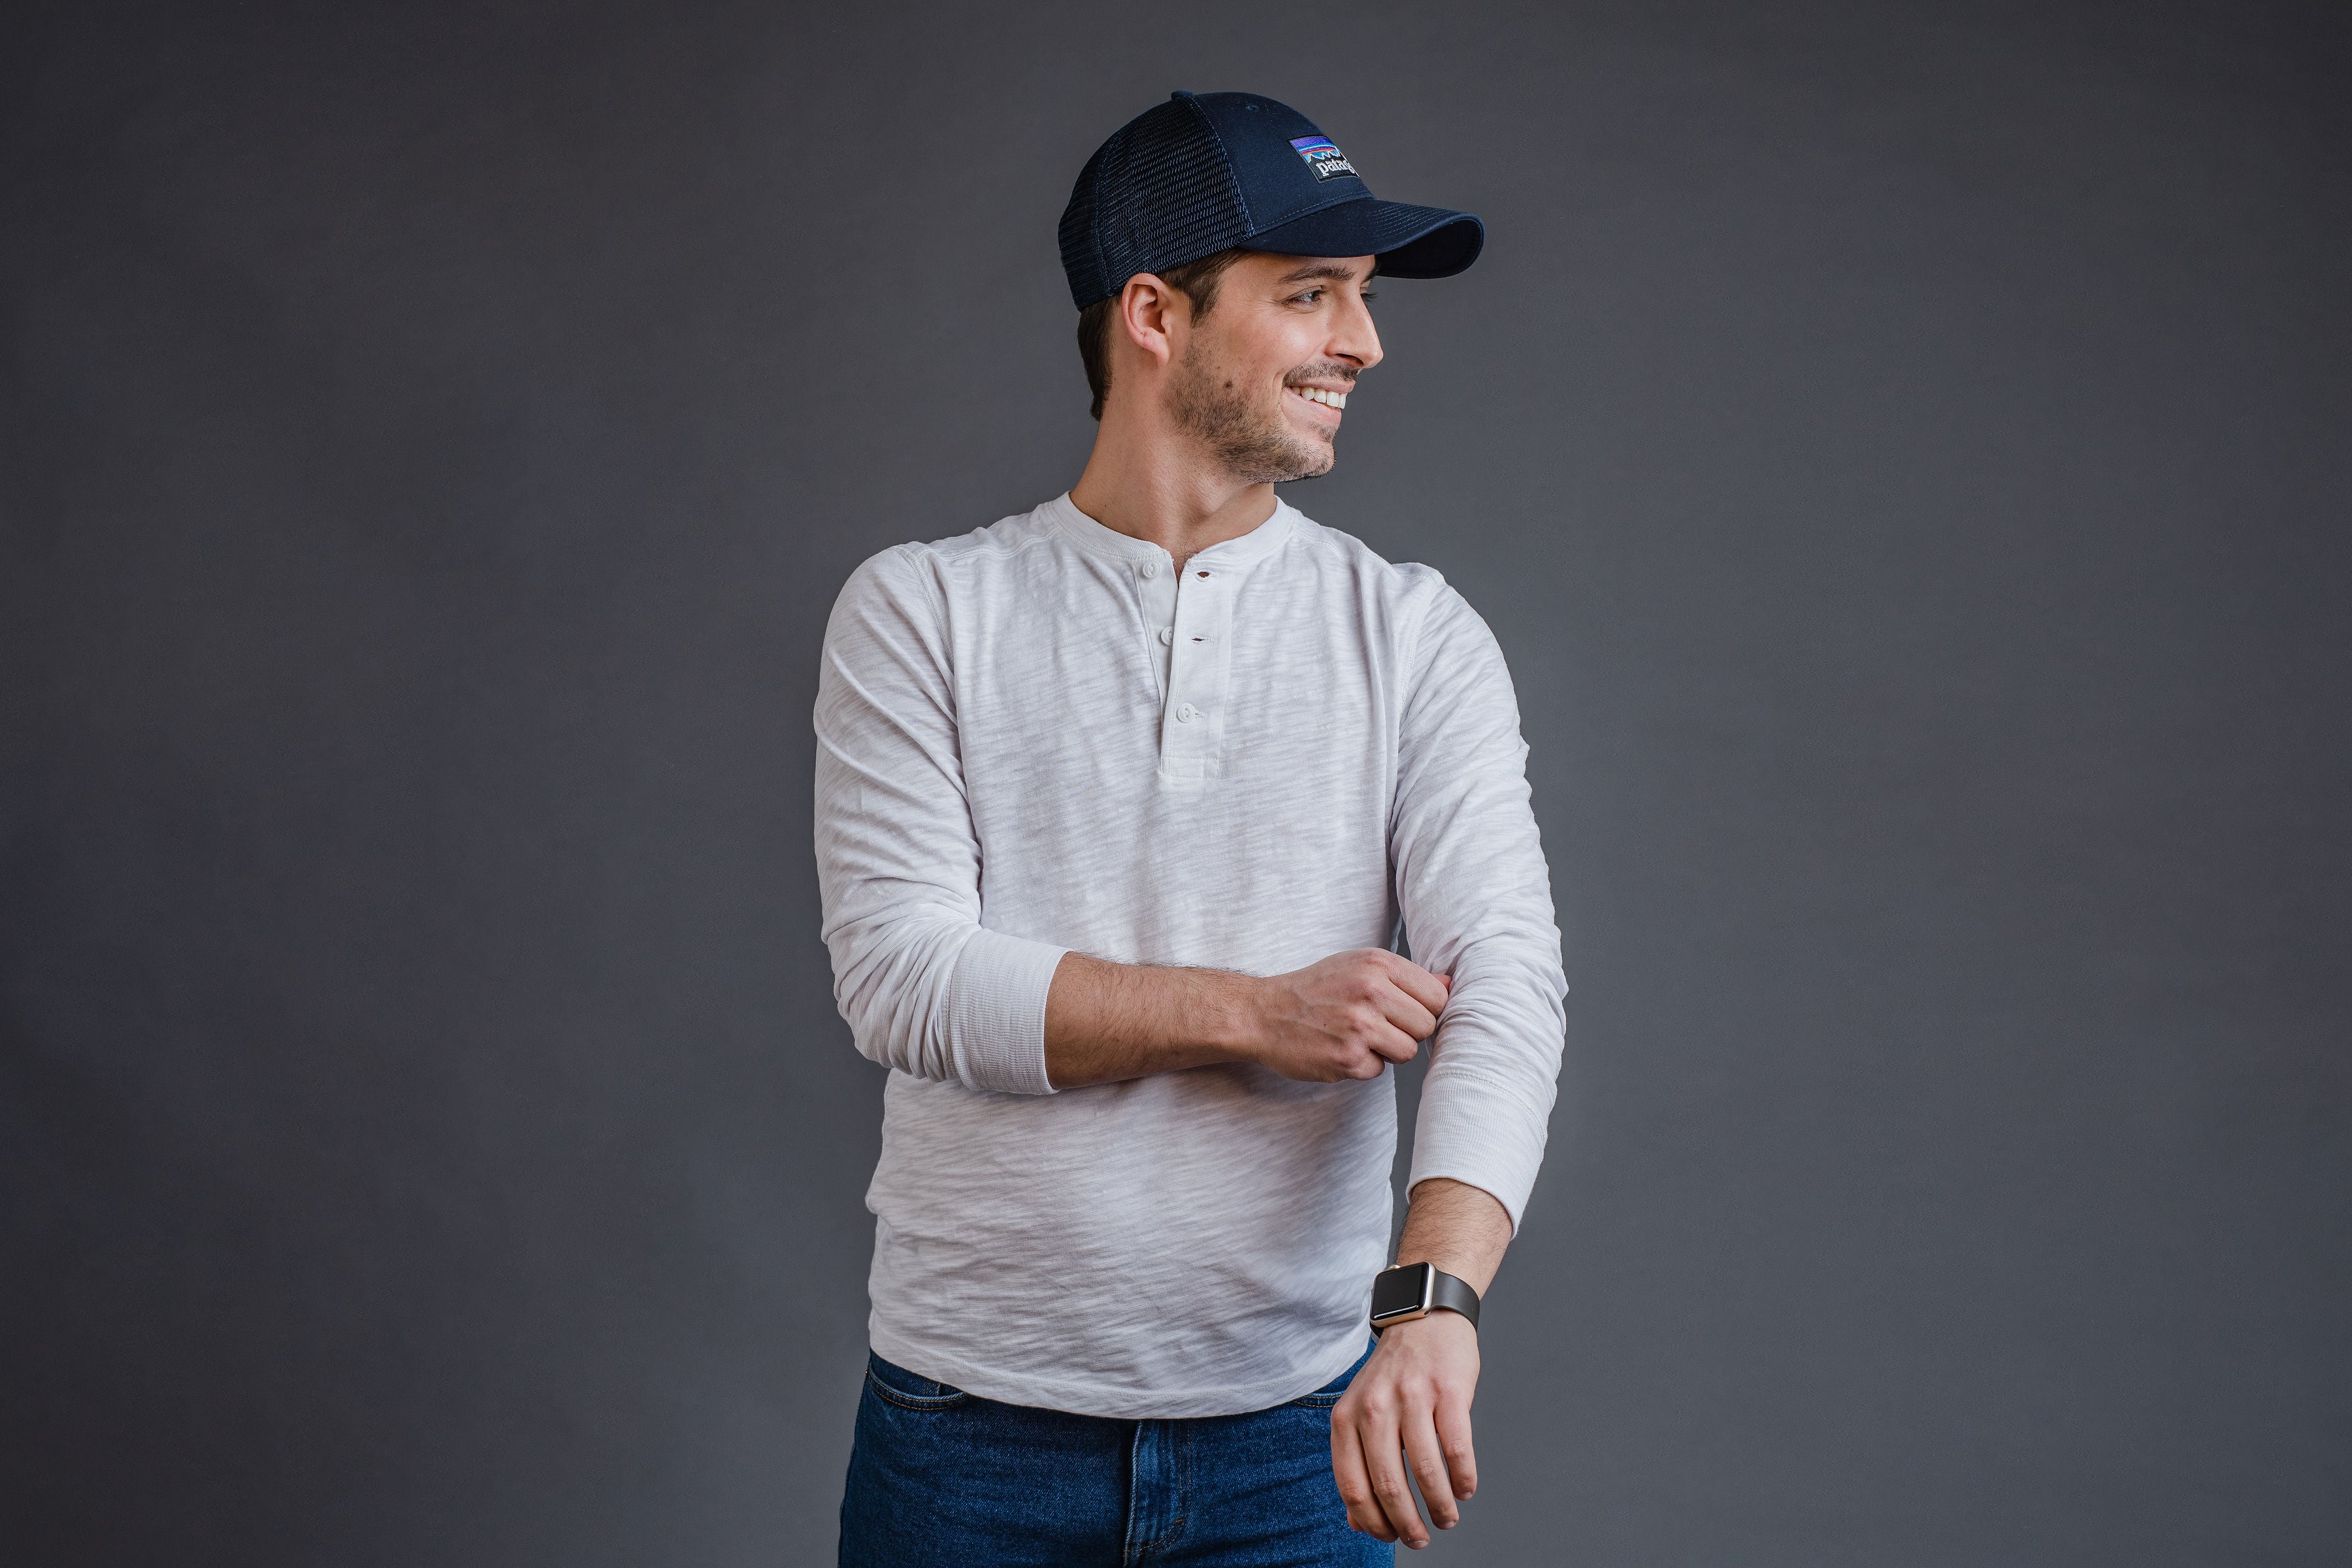 Light Blue Baseball Cap with Grey Pants Warm Weather Outfits For Men (5  ideas & outfits)